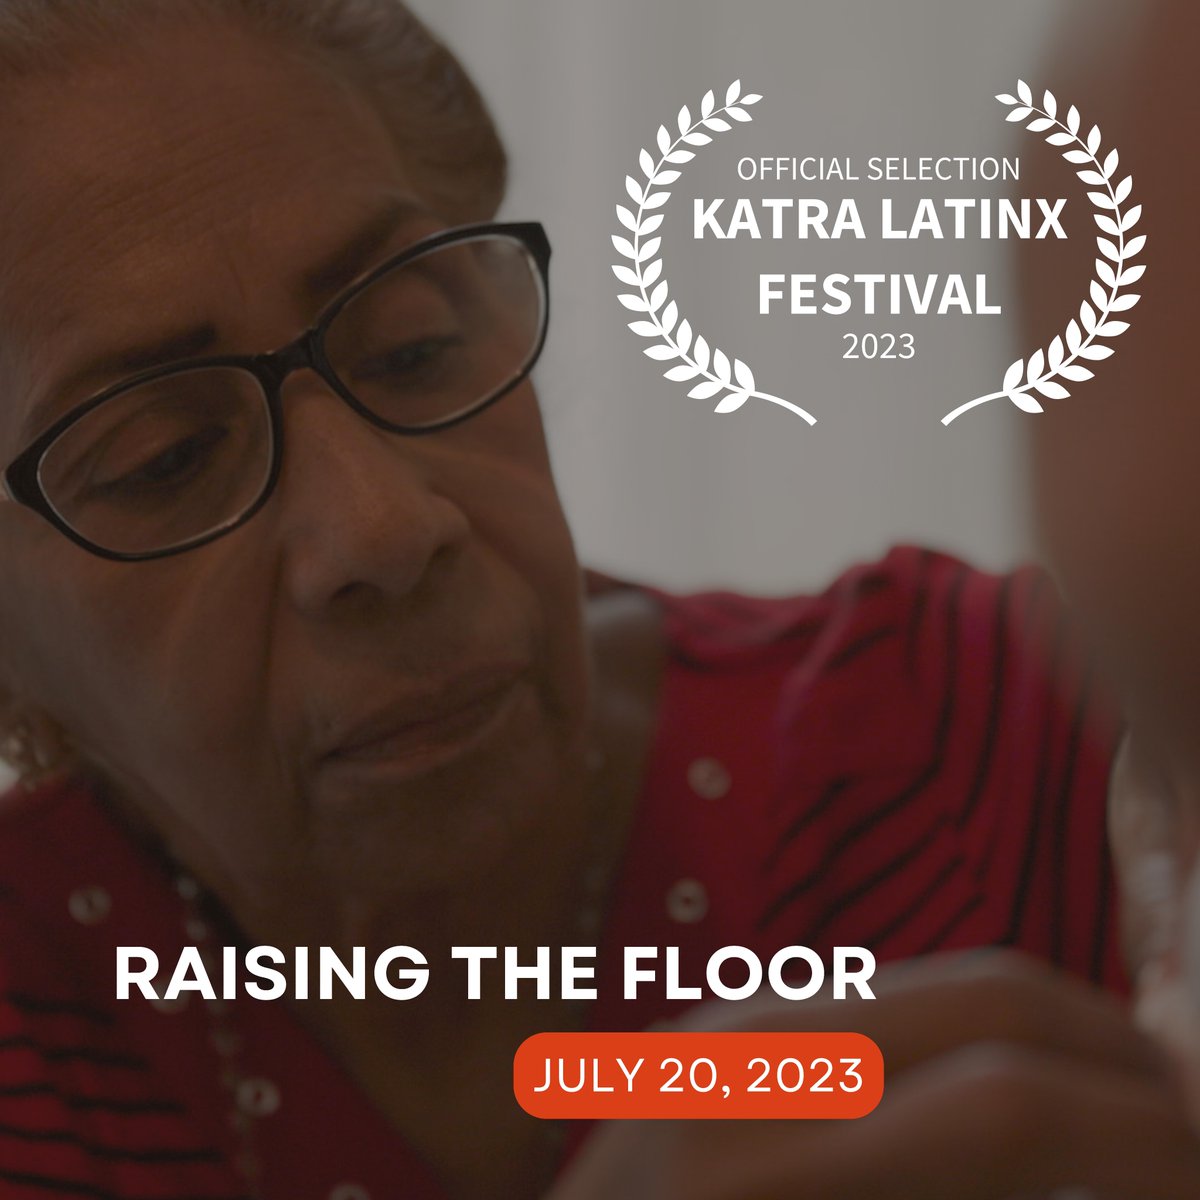 RAISING THE FLOOR is an official selection @KatraFilmSeries LatinX Film Festival. Join us at the Regal Essex Crossing in the lower east side of Manhattan on July 20 for a special screening and Q&A with director @sabaviles 👇 katrafilmseries.com/thursday-july-…